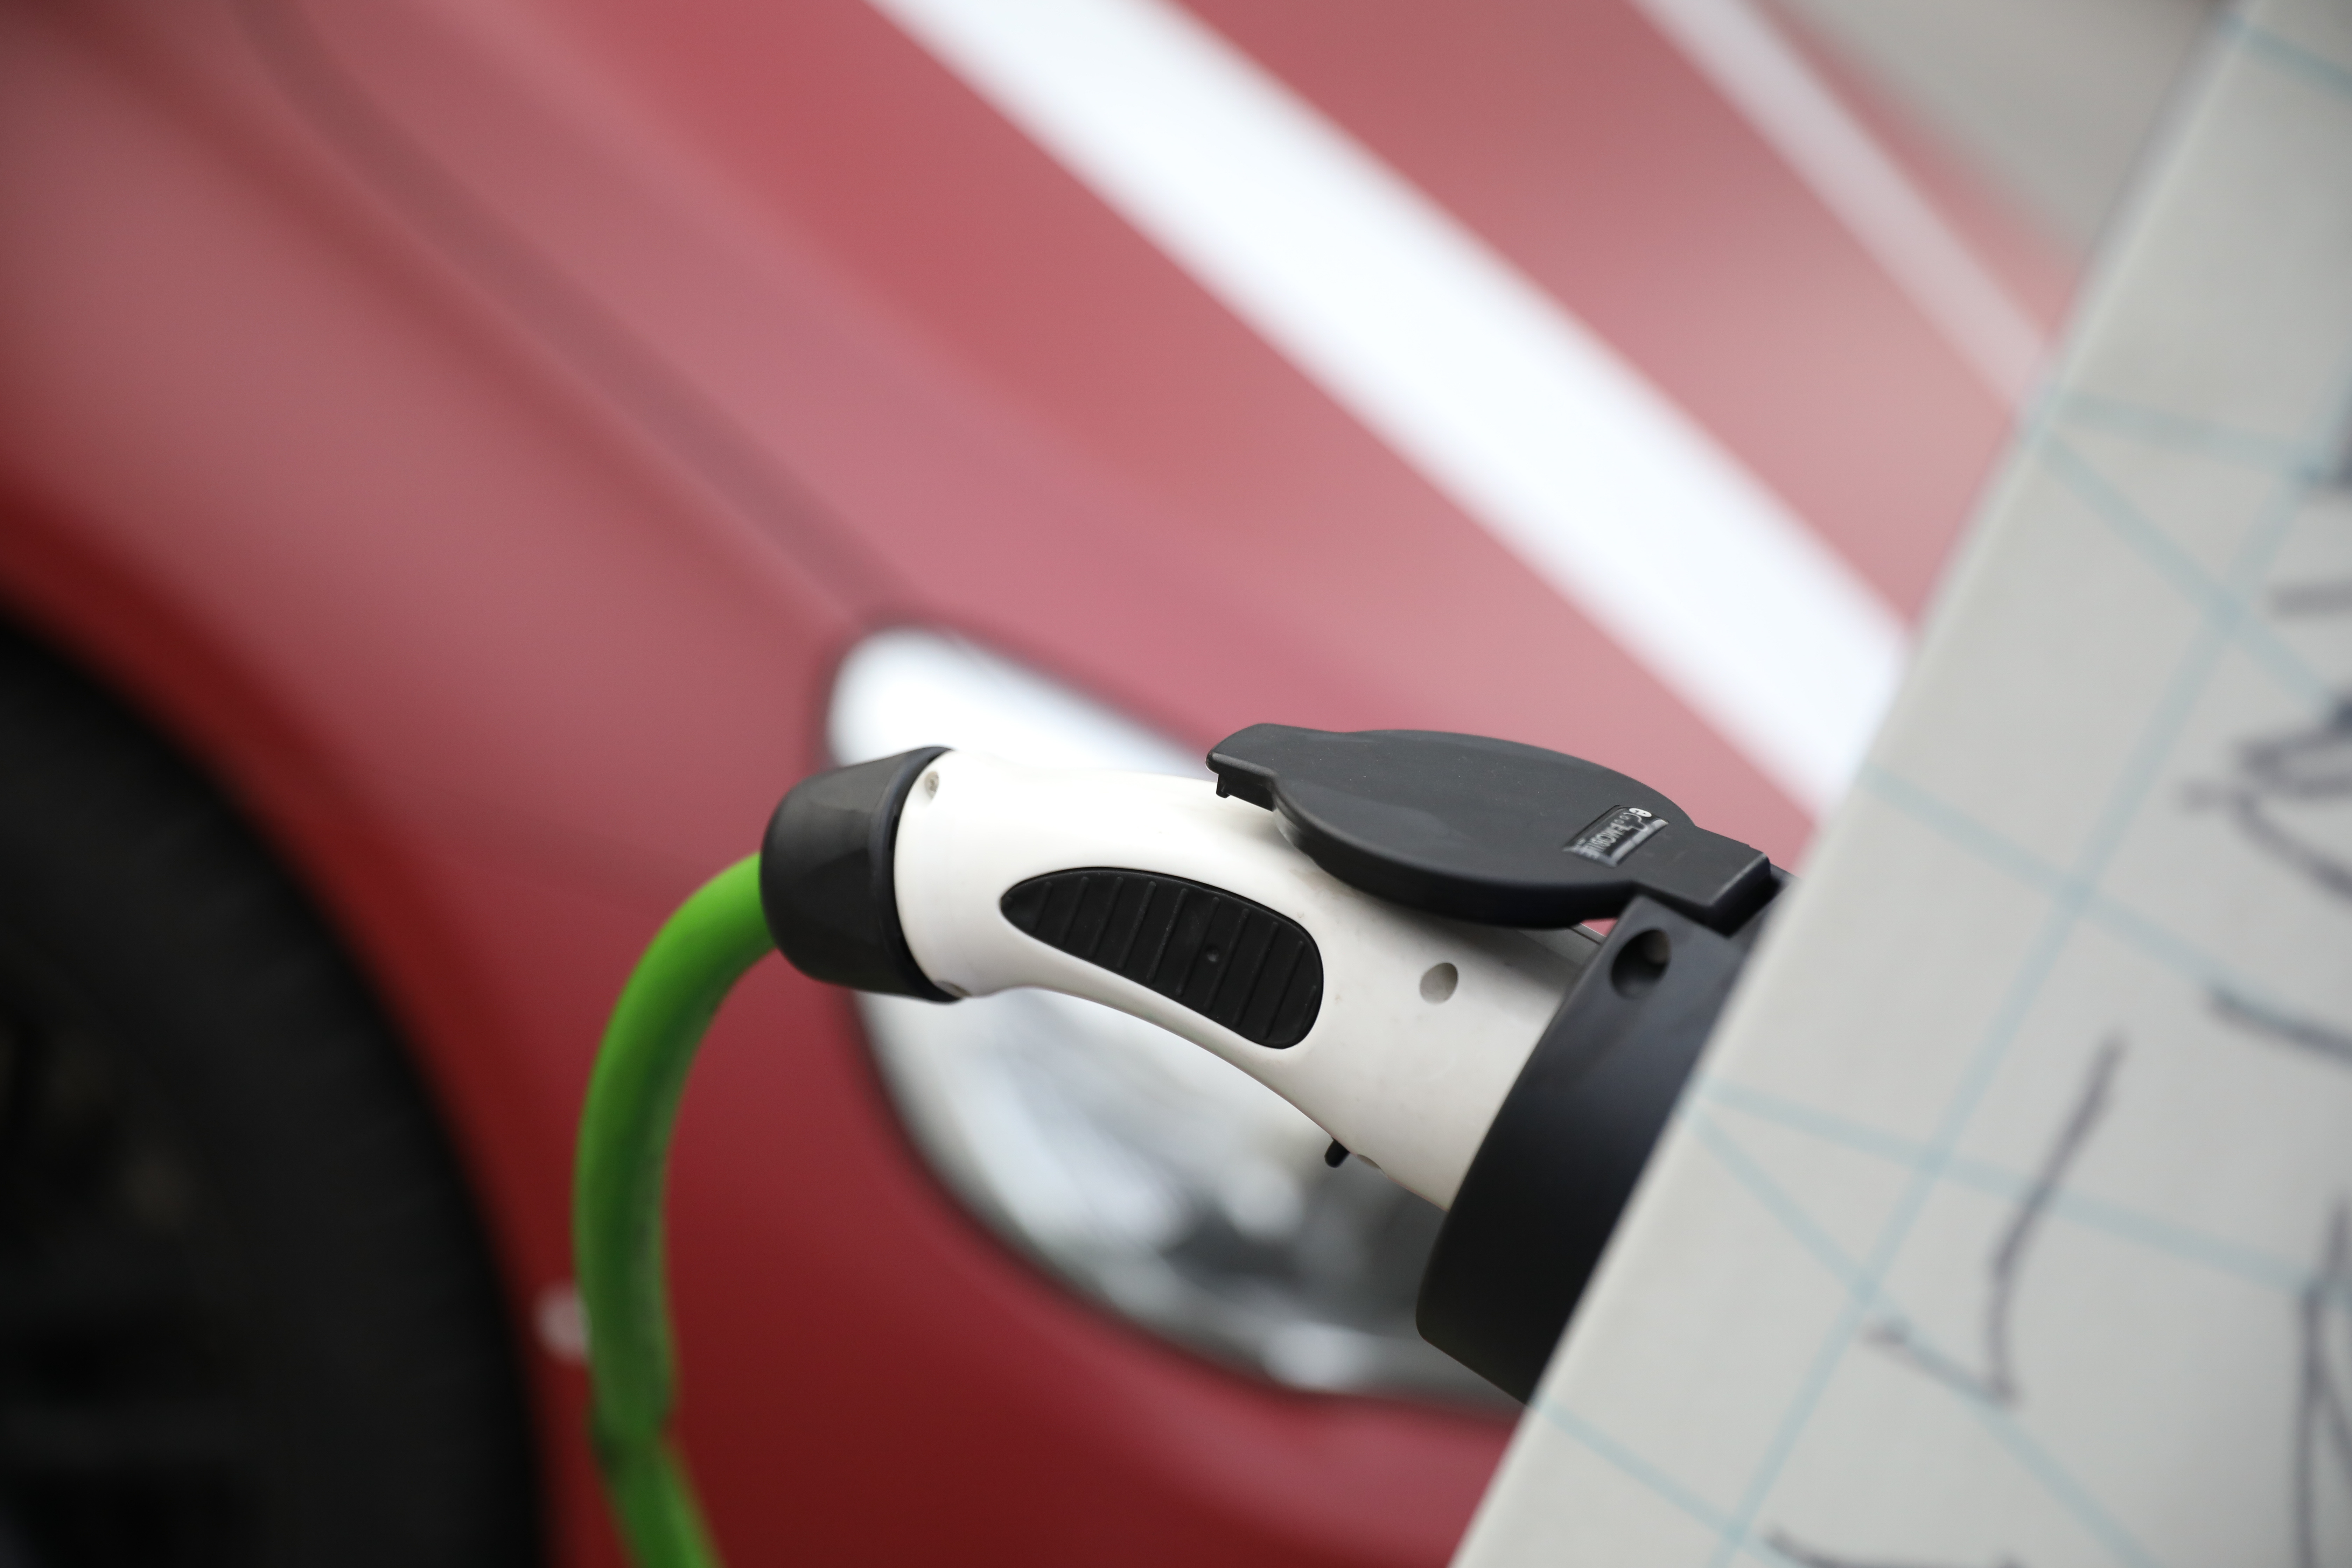 Electric cars now make up 3.2% of new purchases